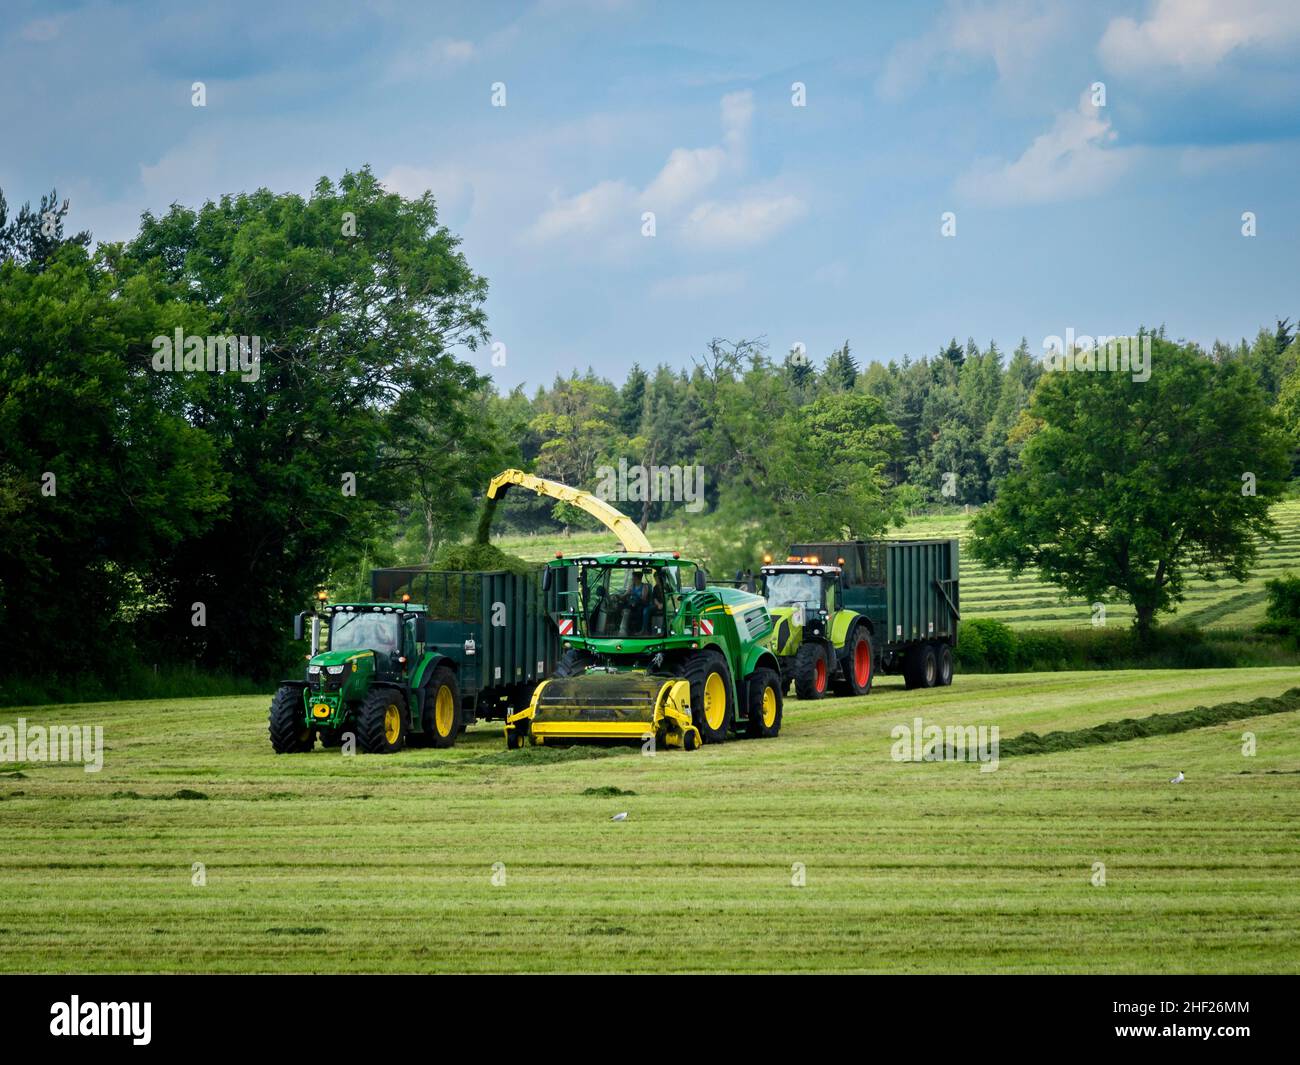 2 two tractors haymaking, working in farm field driving with John Deere harvester loading filling trailers (cut grass silage) - Yorkshire, England UK. Stock Photo